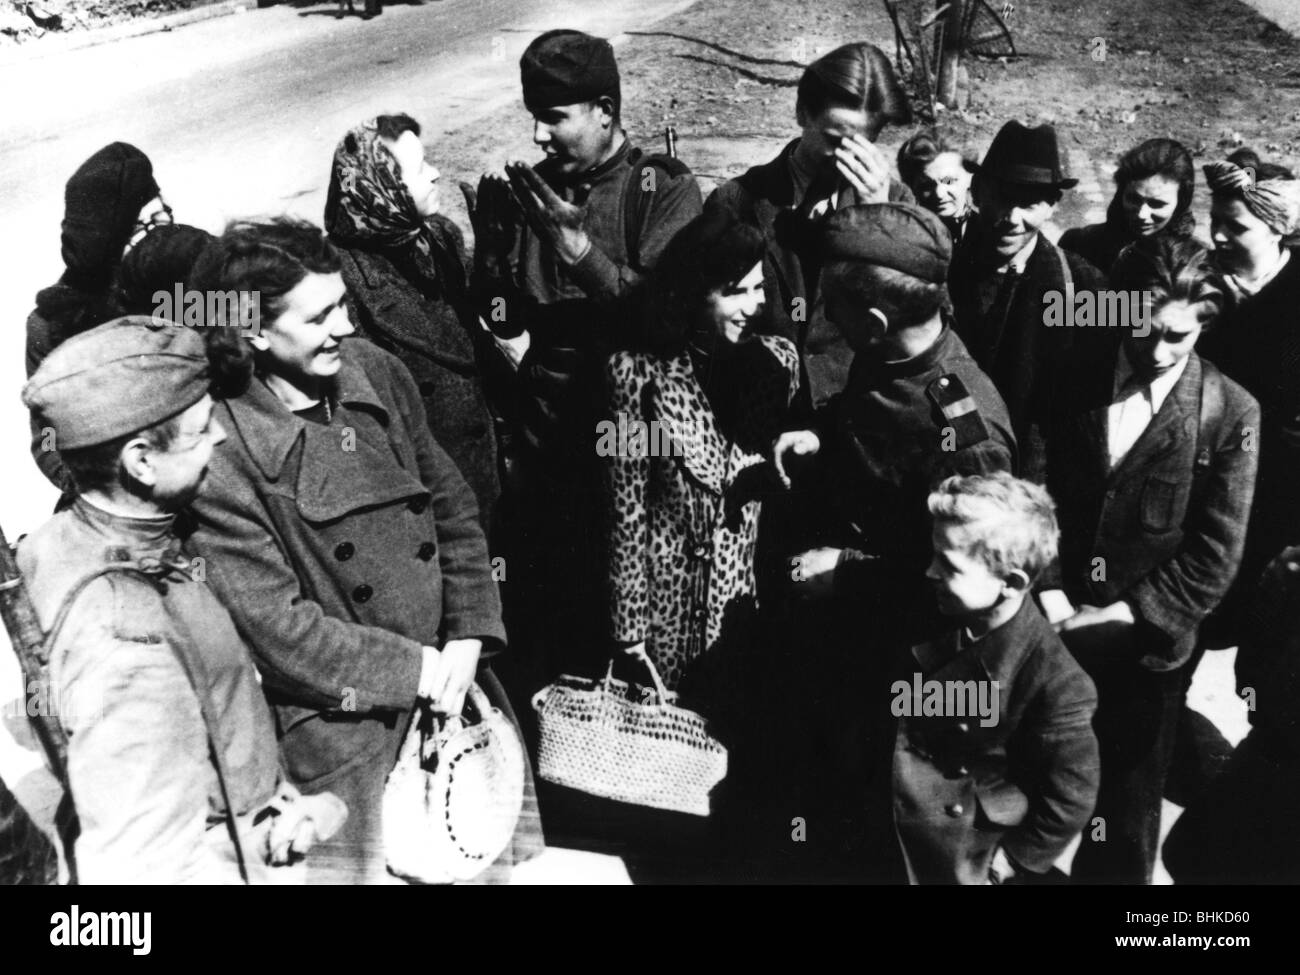 events, Second World War / WWII, Russia 1945 / 1945, Red Army soldiers talking to civilians, probably 1945, end of war, victors, victory, 20th century, historic, historical, Soviet Union, conversation, smiling, occupation, USSR, occupying force, women, children, kids, people, 1940s, Stock Photo